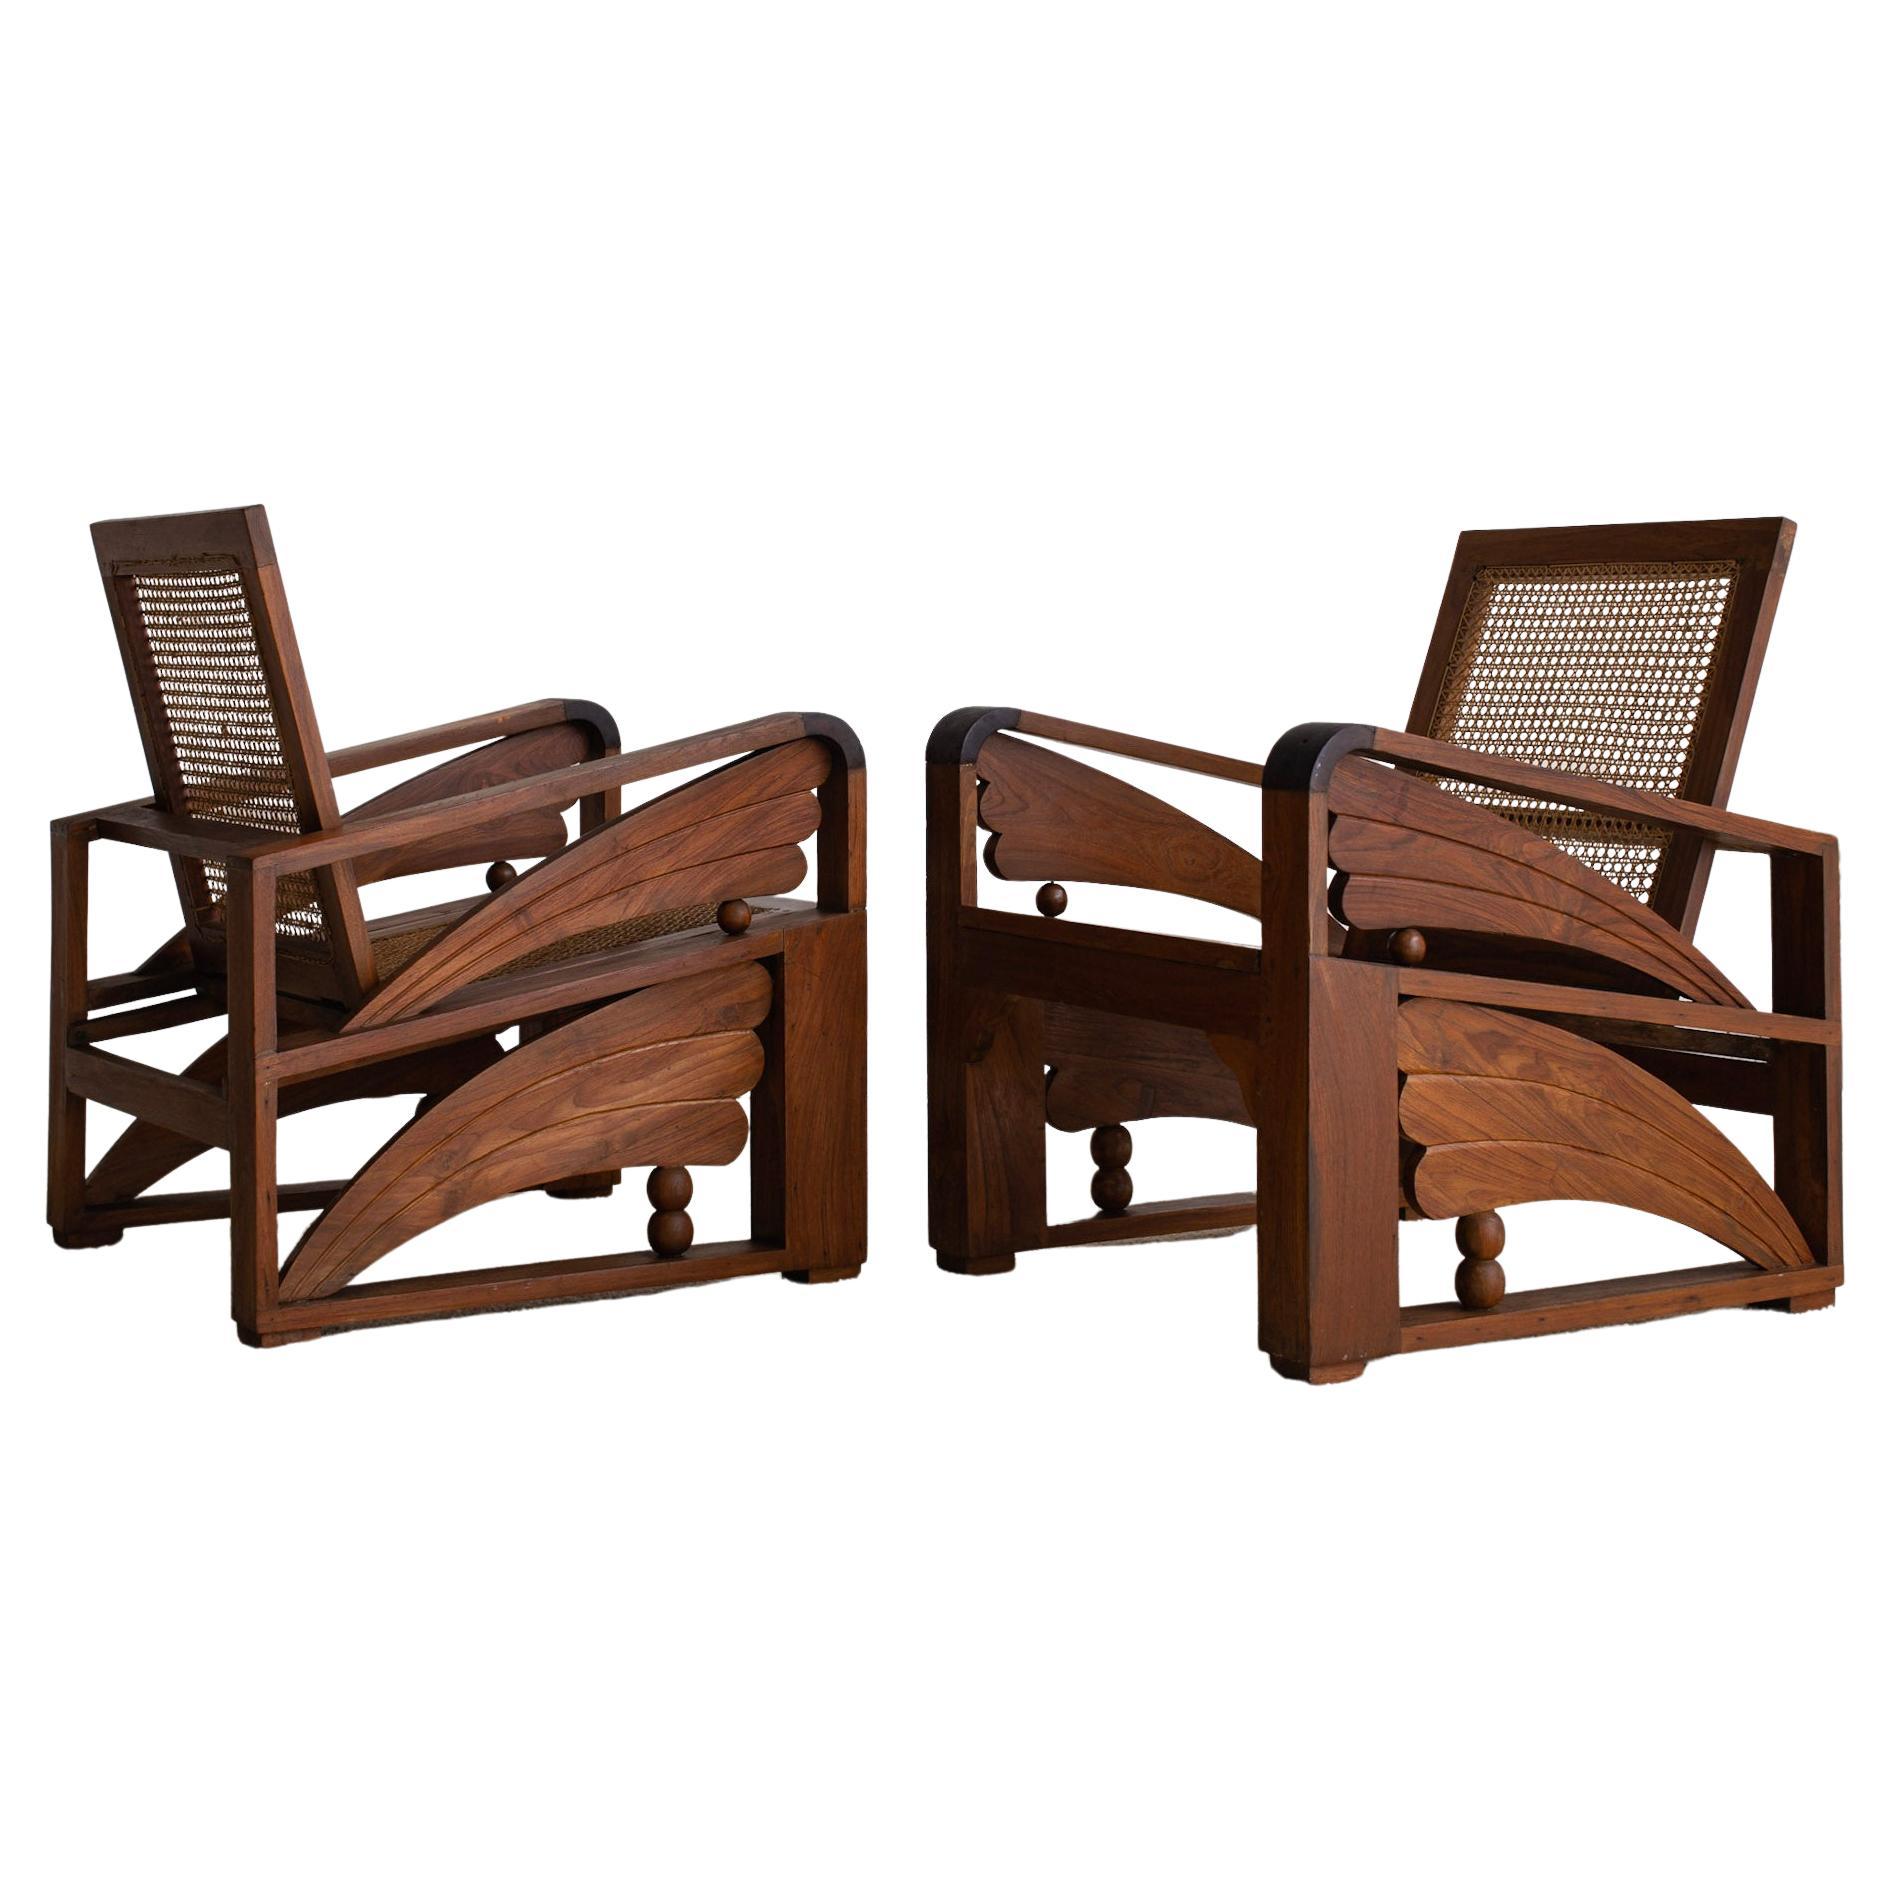 British Colonial Art Deco Teak and Cane Chairs, a Pair